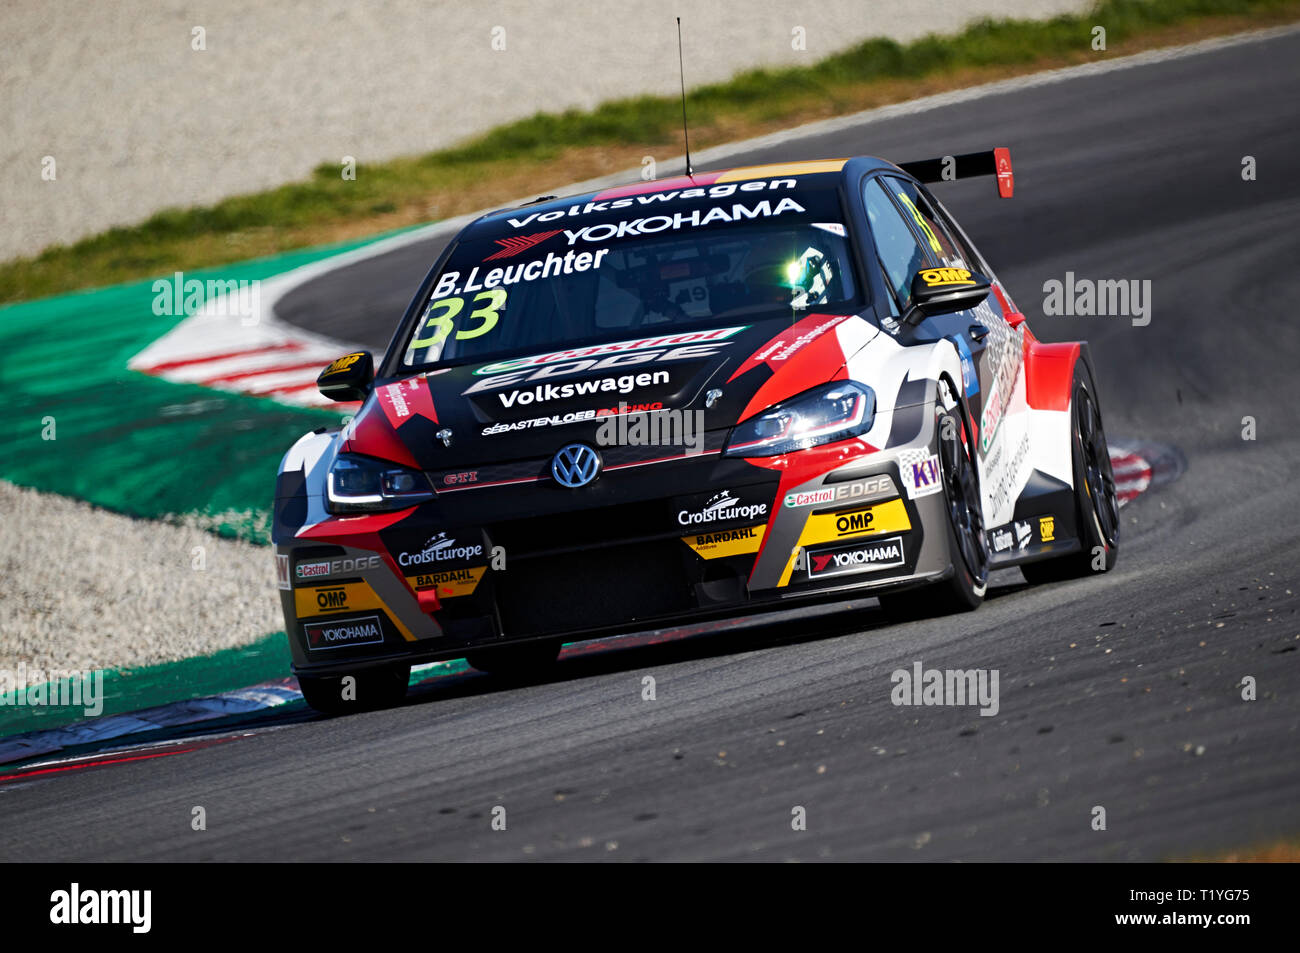 Circuit de Barcelona-Catalunya, Barcelona, Spain. 29th Mar, 2019. FIA World  Touring Championship, testing day 2; Benjamin Leuchter (DEU), Volkswagen  Golf GTI TCR in action during the WTCR official test Credit: Action Plus